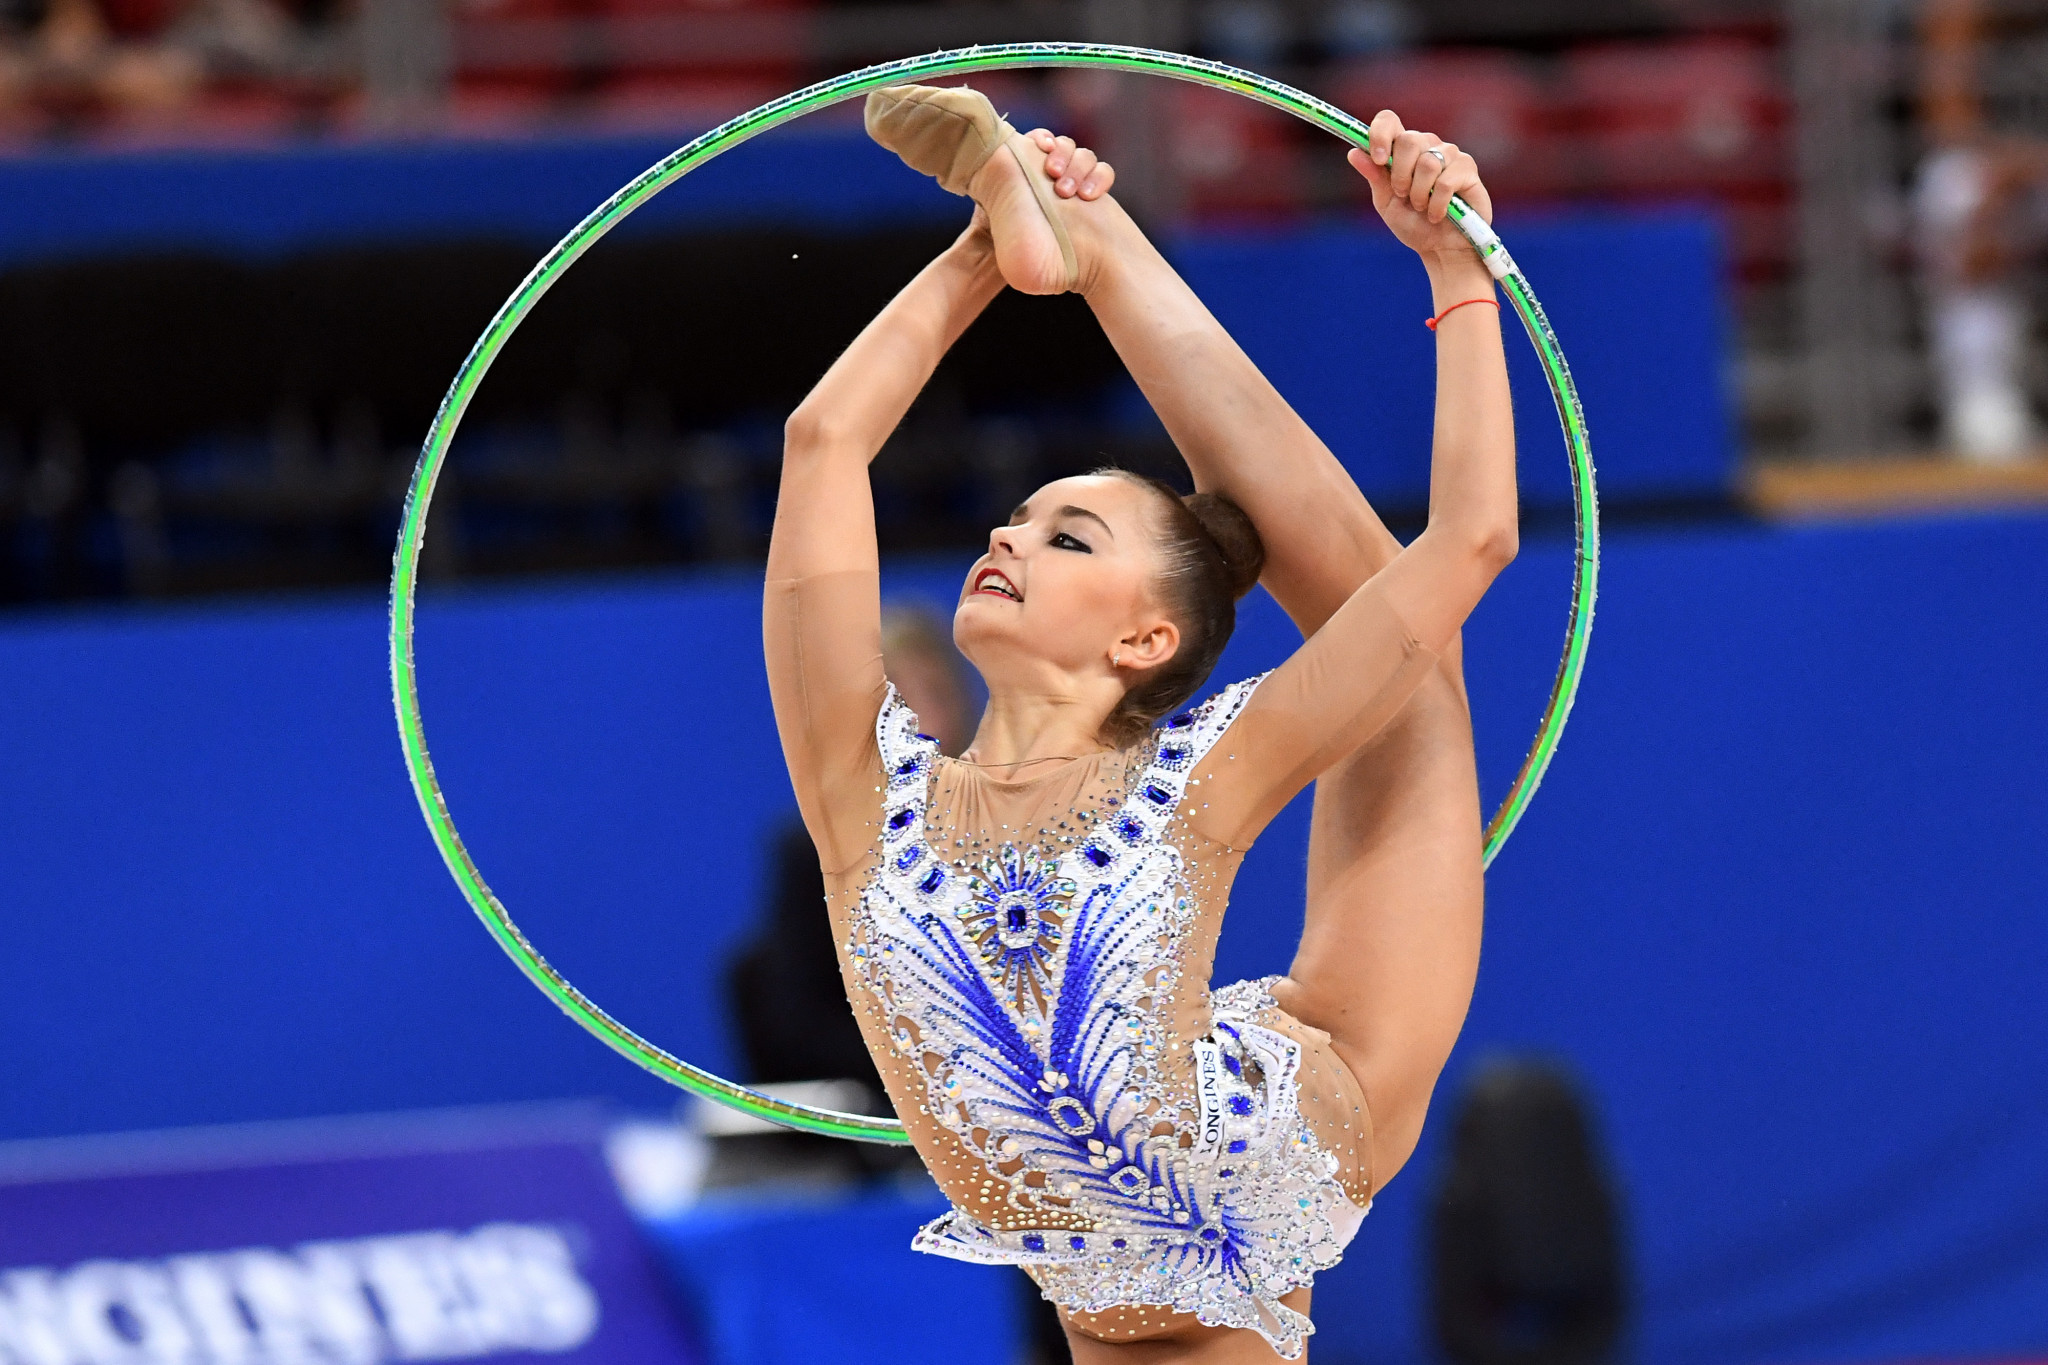 Averina twins shine as Russians dominate FIG World Challenge Cup in Minsk